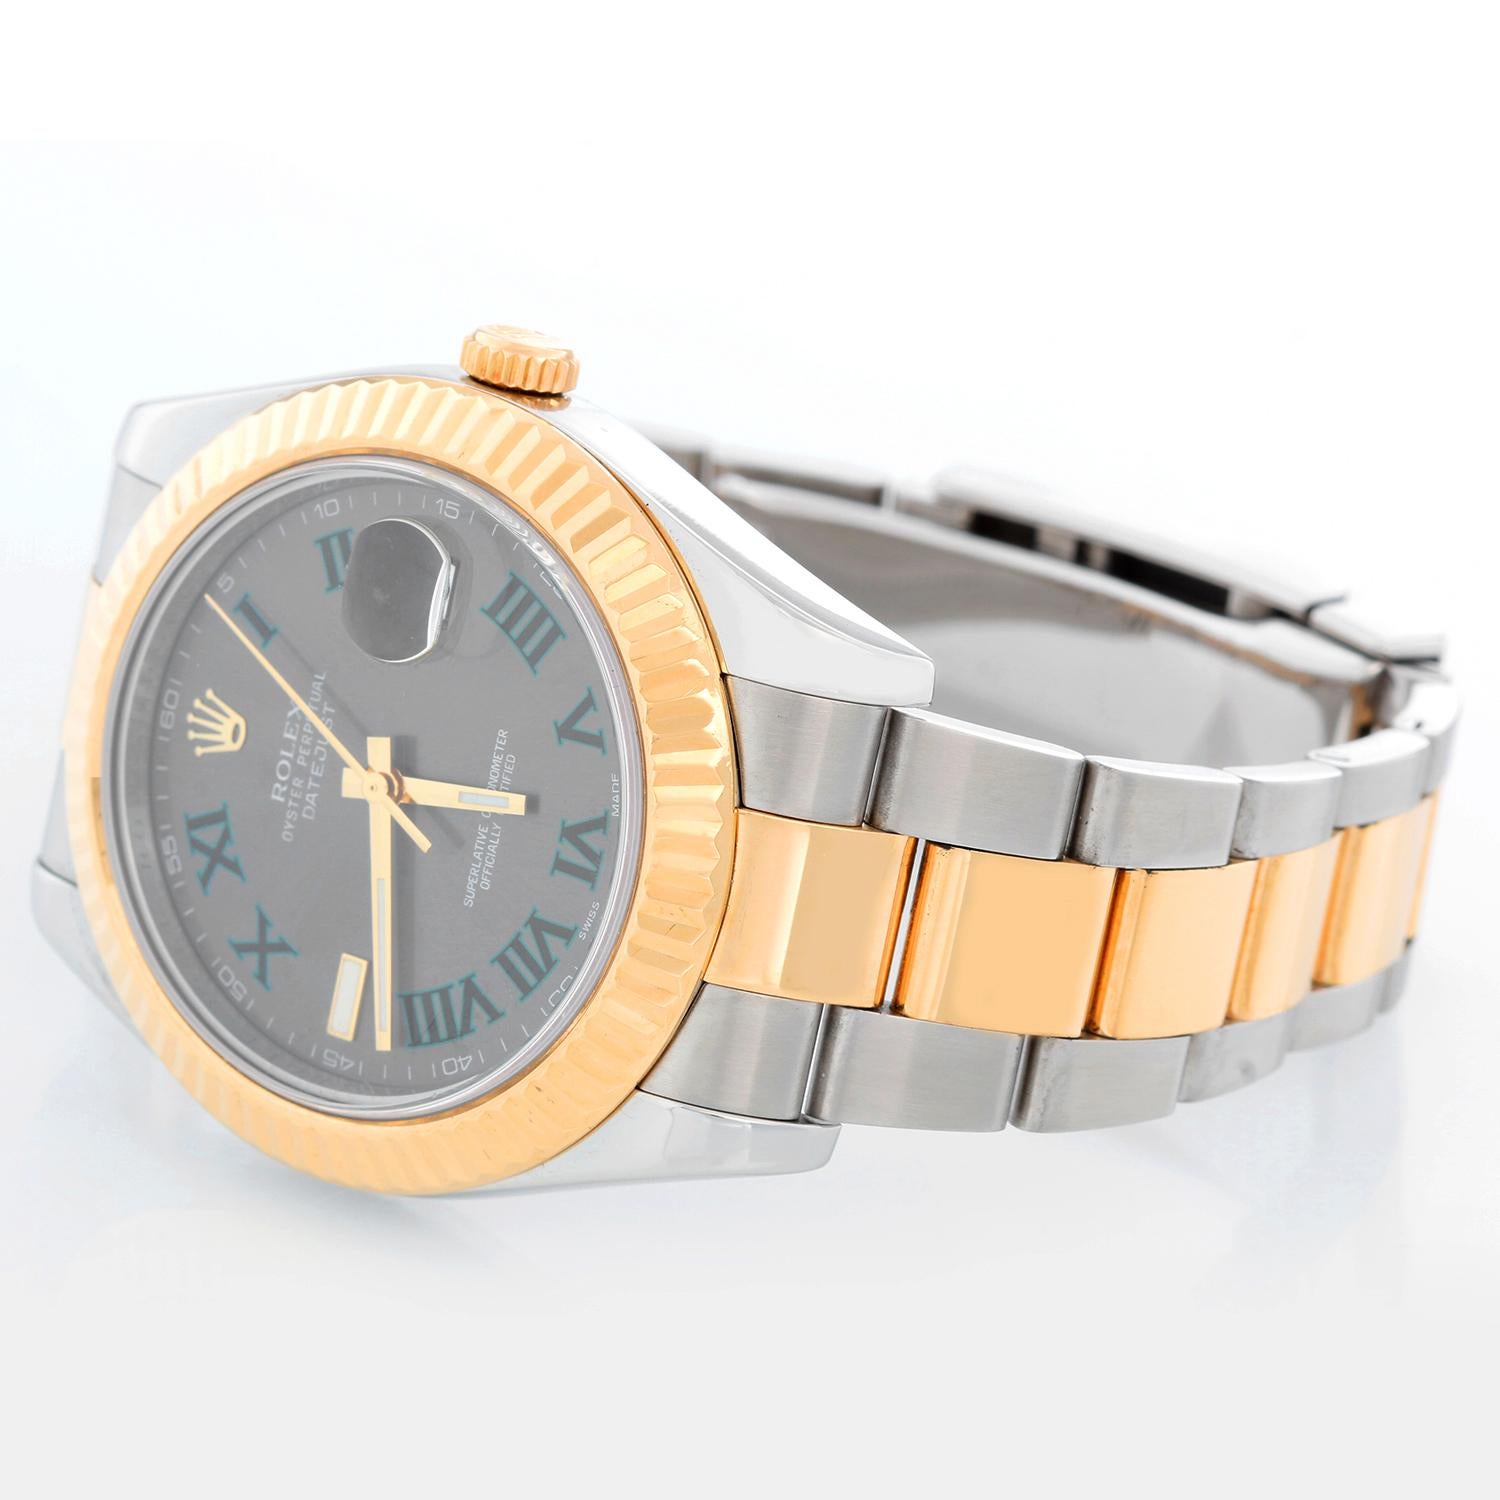 Rolex Datejust II  Men's 2-Tone Steel & Gold 41mm Watch 116333 - Automatic winding, Quickset, sapphire crystal. Stainless steel case with 18k yellow gold fluted bezel  (41mm diameter). Slate Gray Wimbledon dial with green Roman numerals; Marker at 9